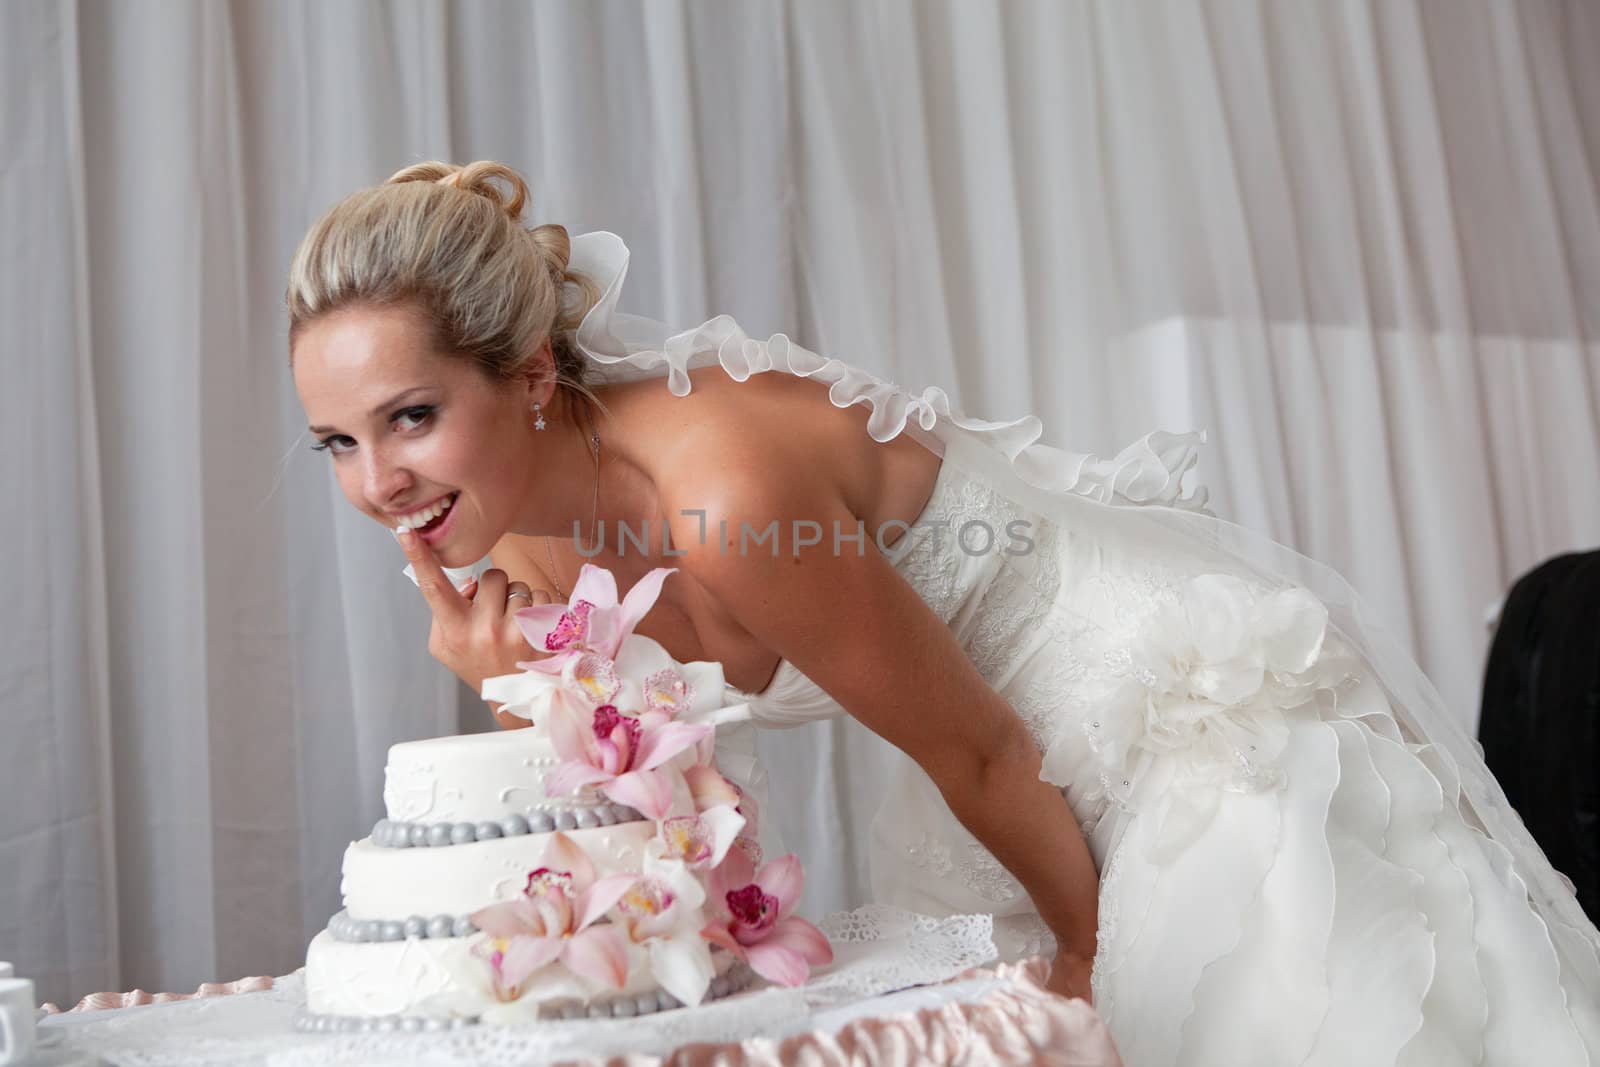 bride near a wedding cake with pink flowers